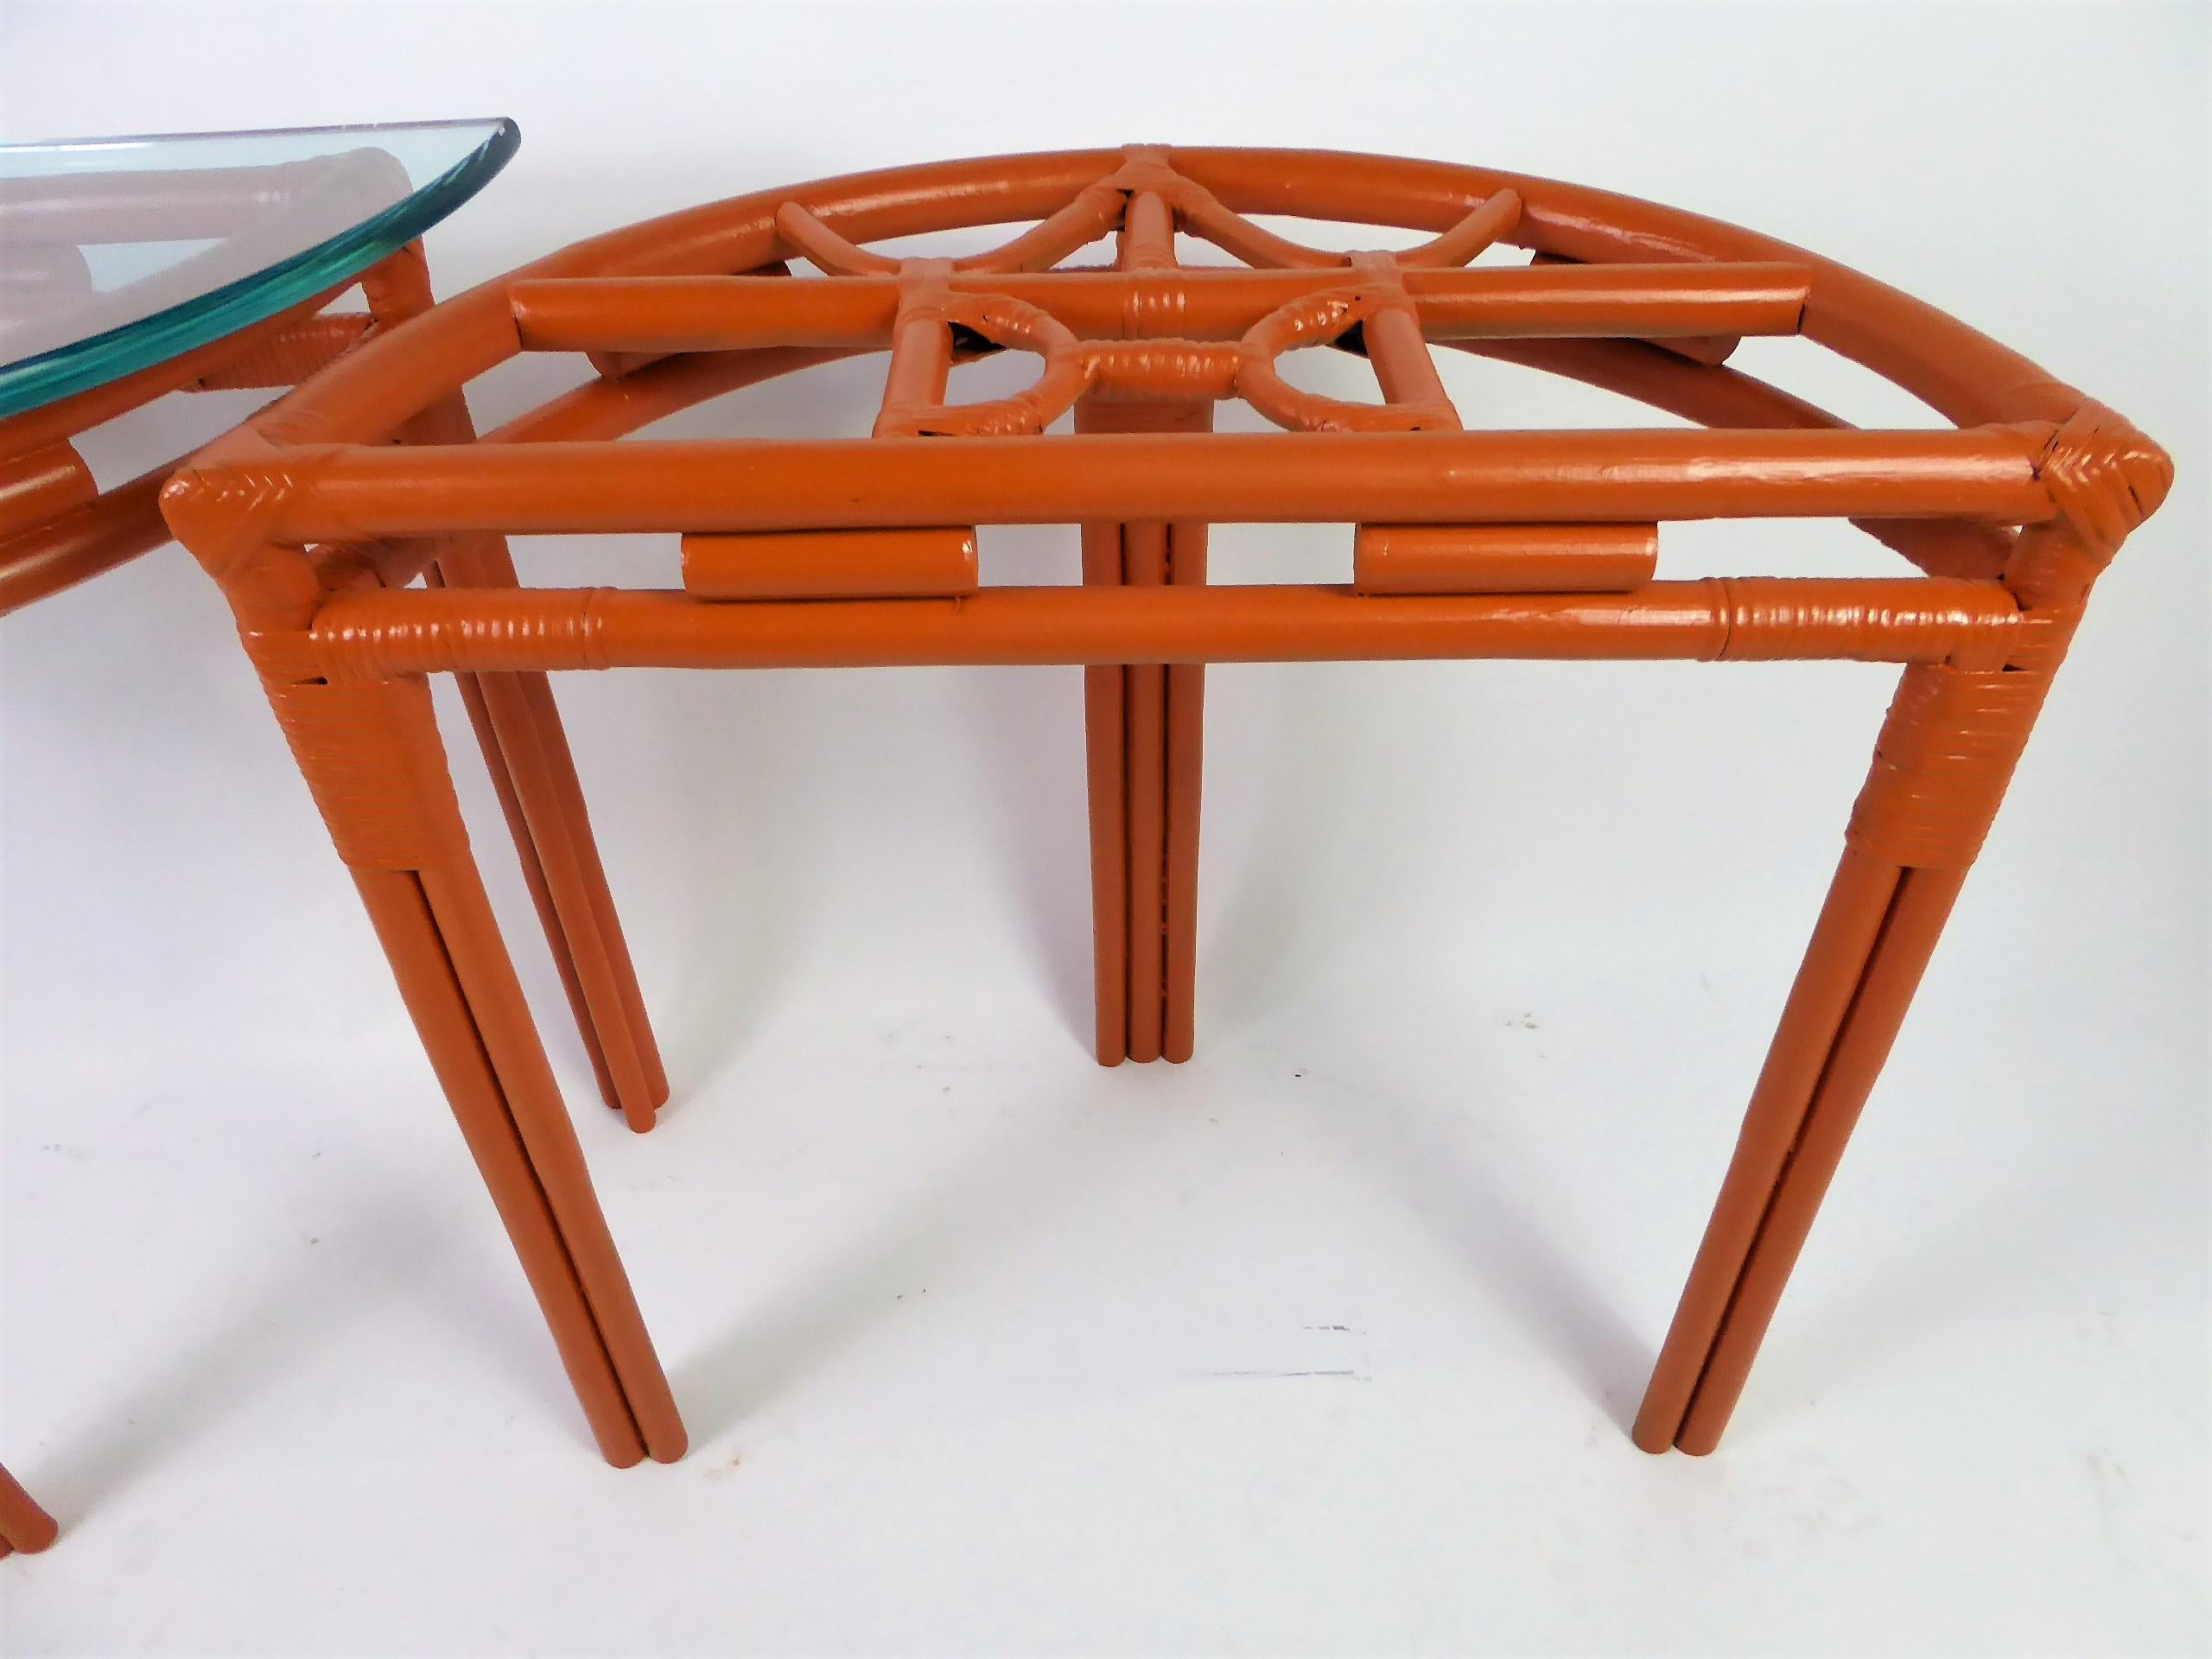 1940s Painted Rattan Demilune Glass Top Consoles in Hermes Orange 10